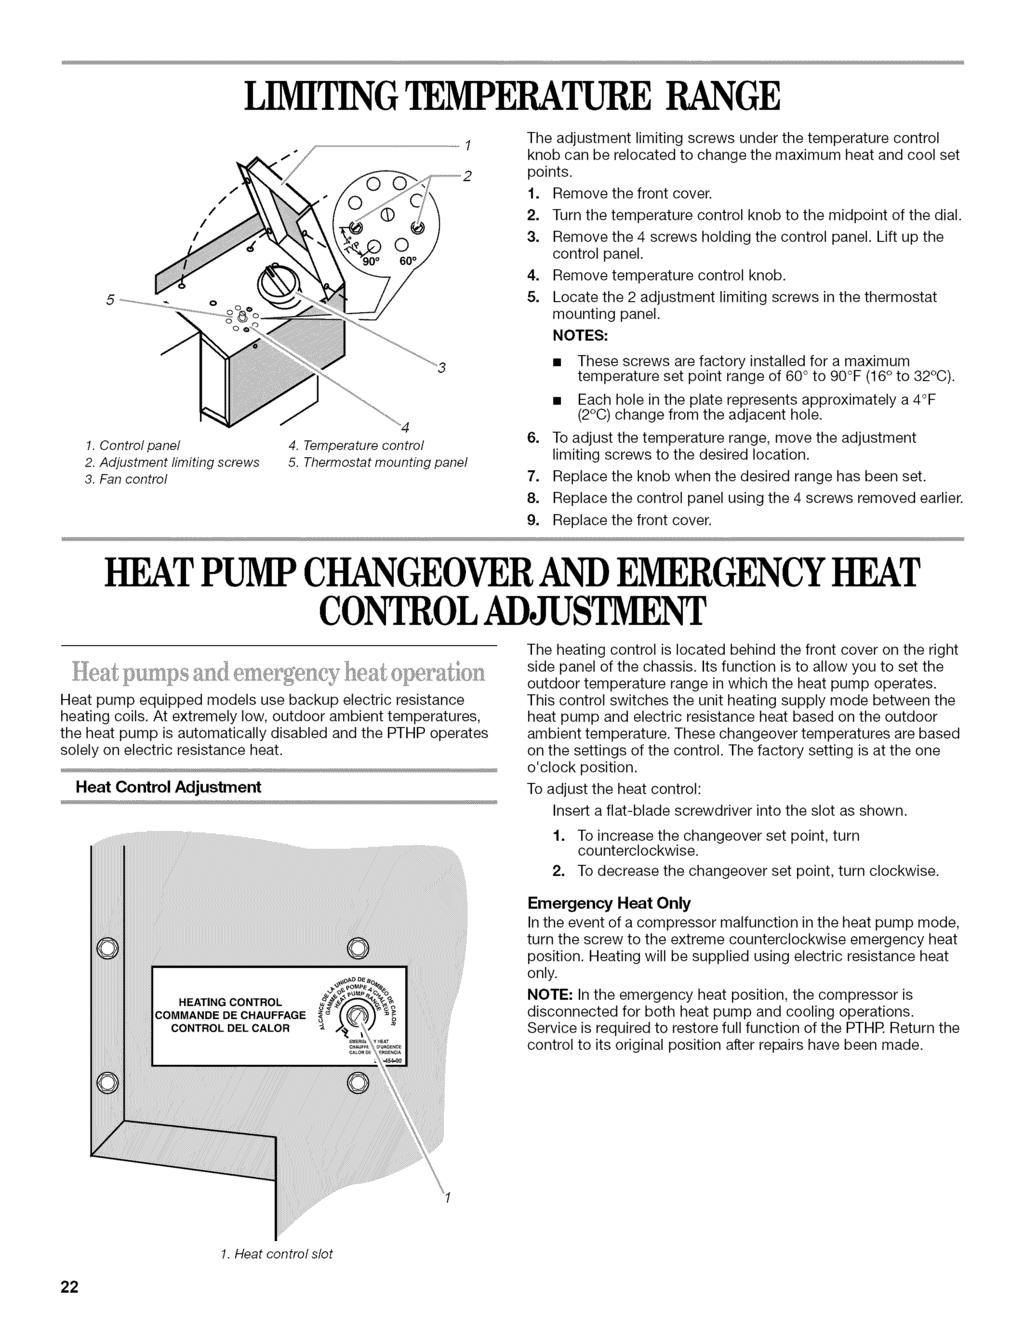 LIMITINGTEMPERATURE RANGE / l I The adjustment limiting screws under the temperature control knob can be relocated to change the maximum heat and cool set points. 1. Remove the front cover. 2.